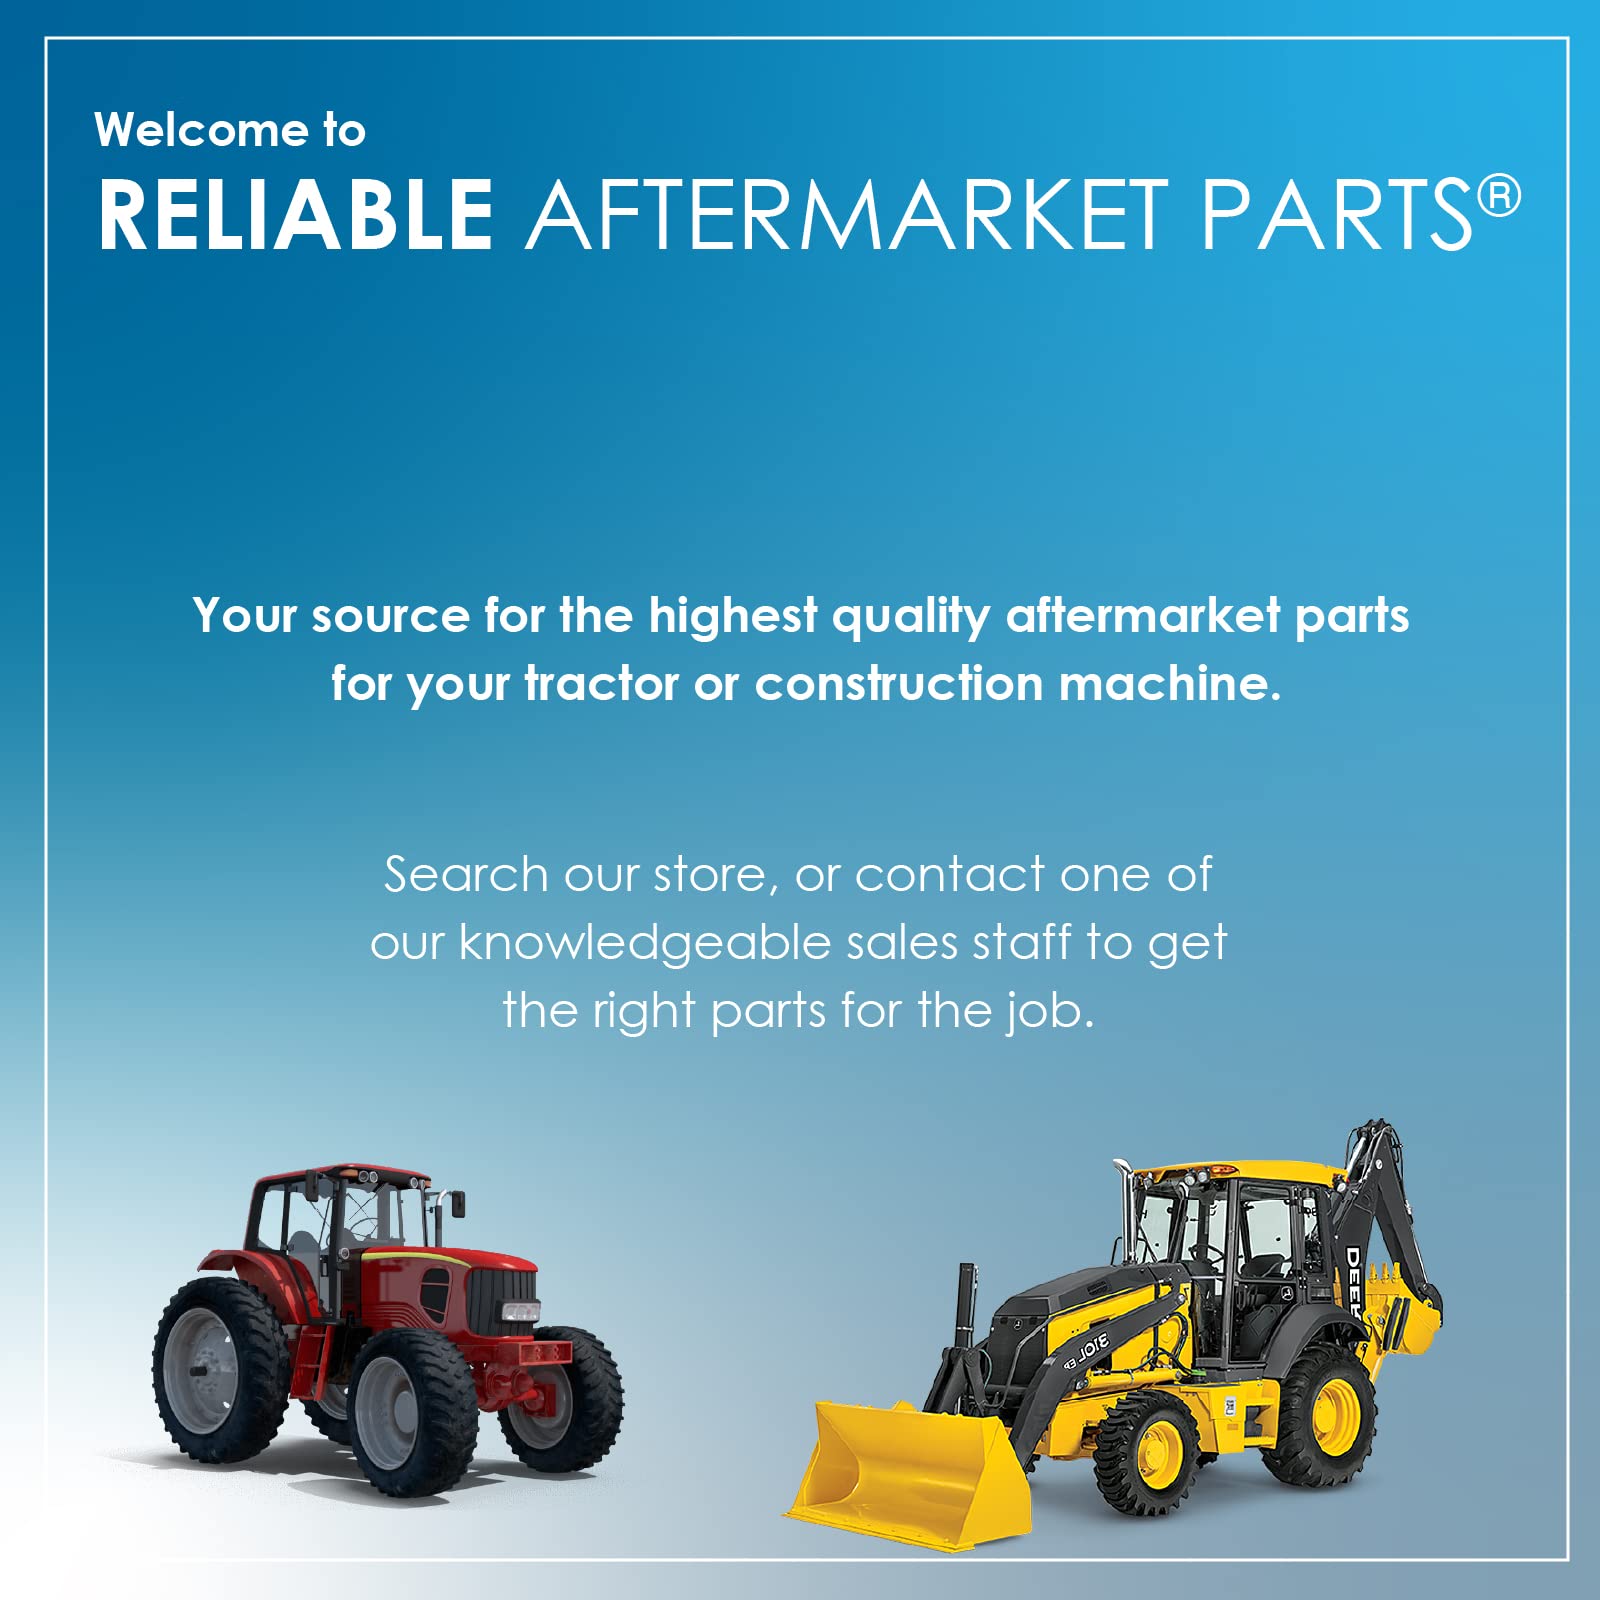 Reliable Aftermarket Parts Our Name Says It All (6) Deck Wheel 5 X 2-3/4 Fits Bad Boy Fits Exmark Fits Lawn-Boy Fits Kubota